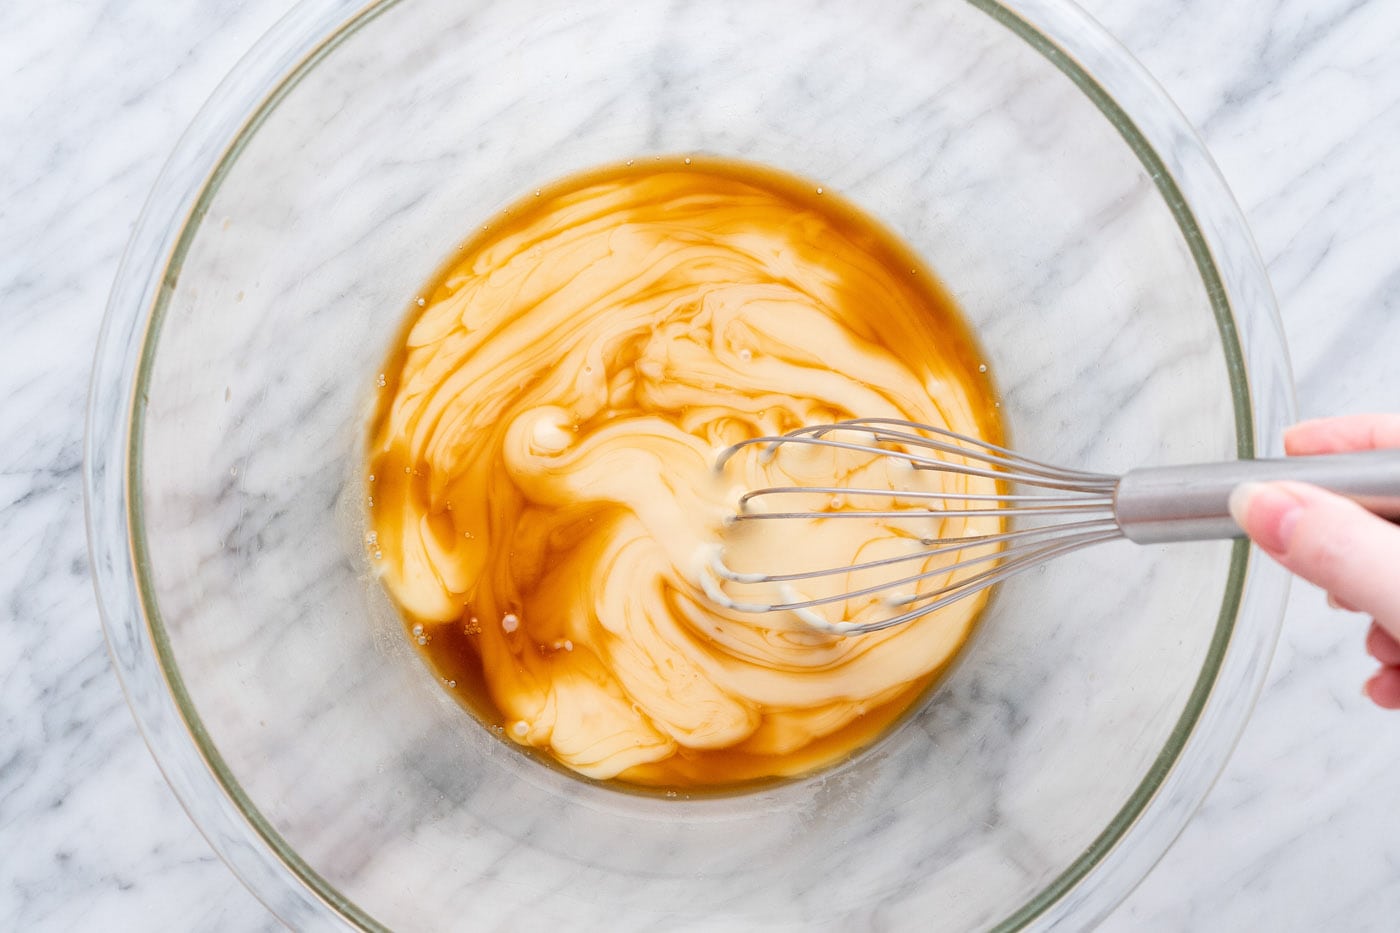 whisking vanilla and sweetened condensed milk together in a bowl